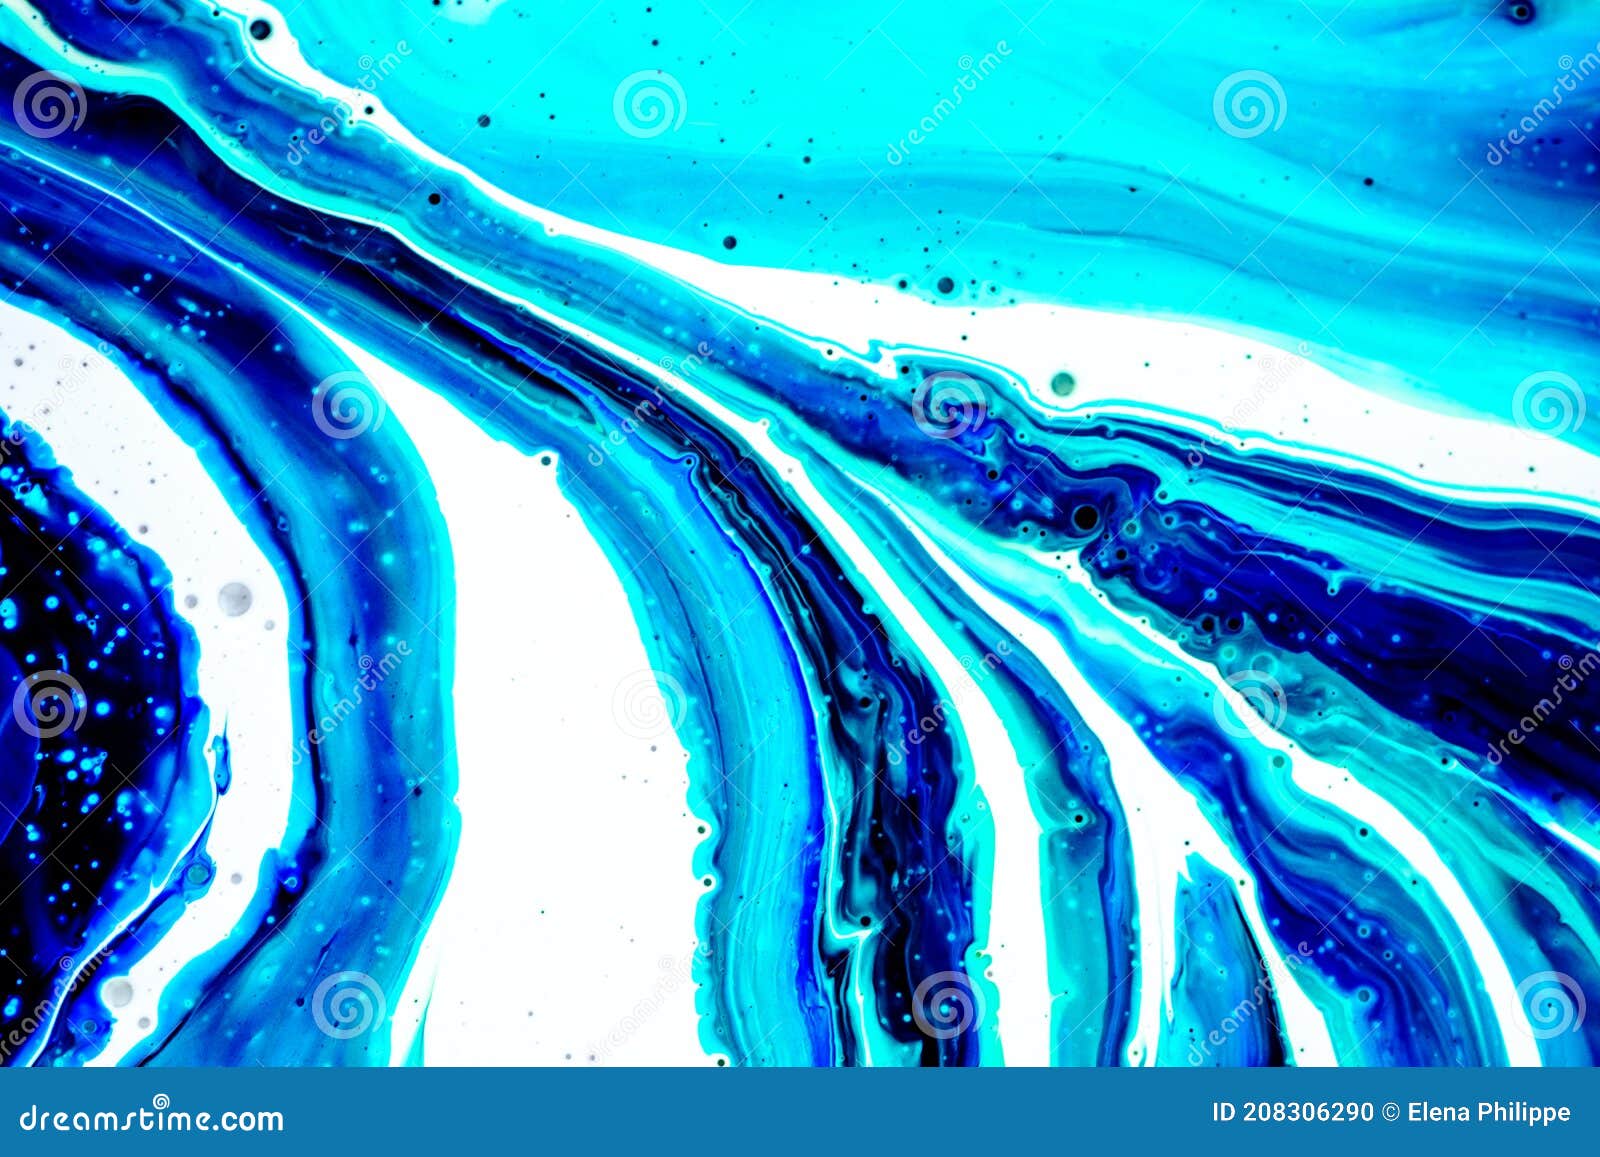 Acrylic Paints. Abstract Galaxy Marble Wallpaper. Beautiful Mixed Blue,  Azure and White Colors Stock Photo - Image of drawing, fantasy: 208306290